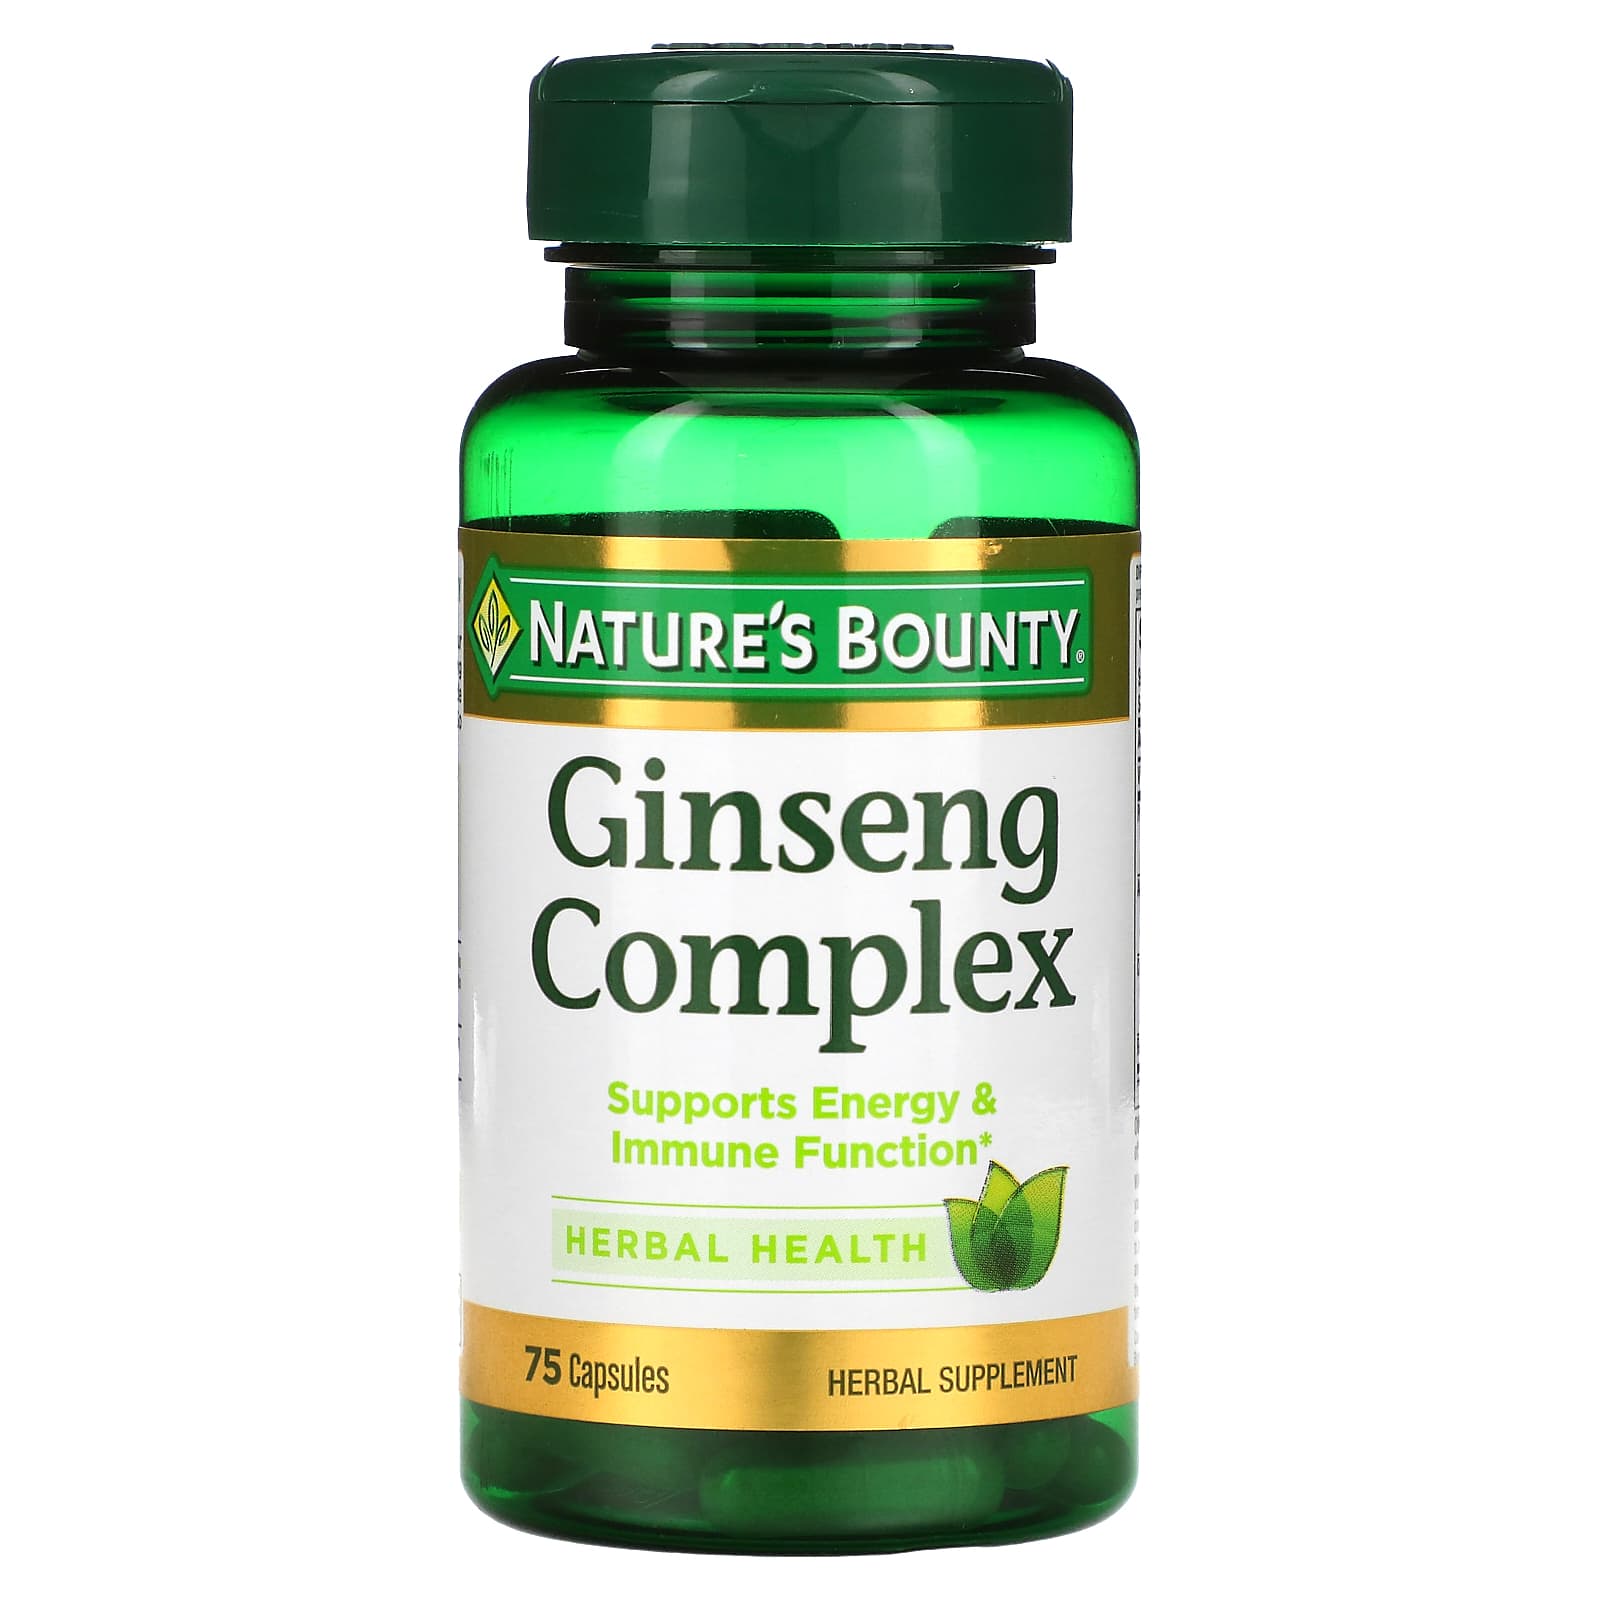 nature's bounty ginseng complex reviews